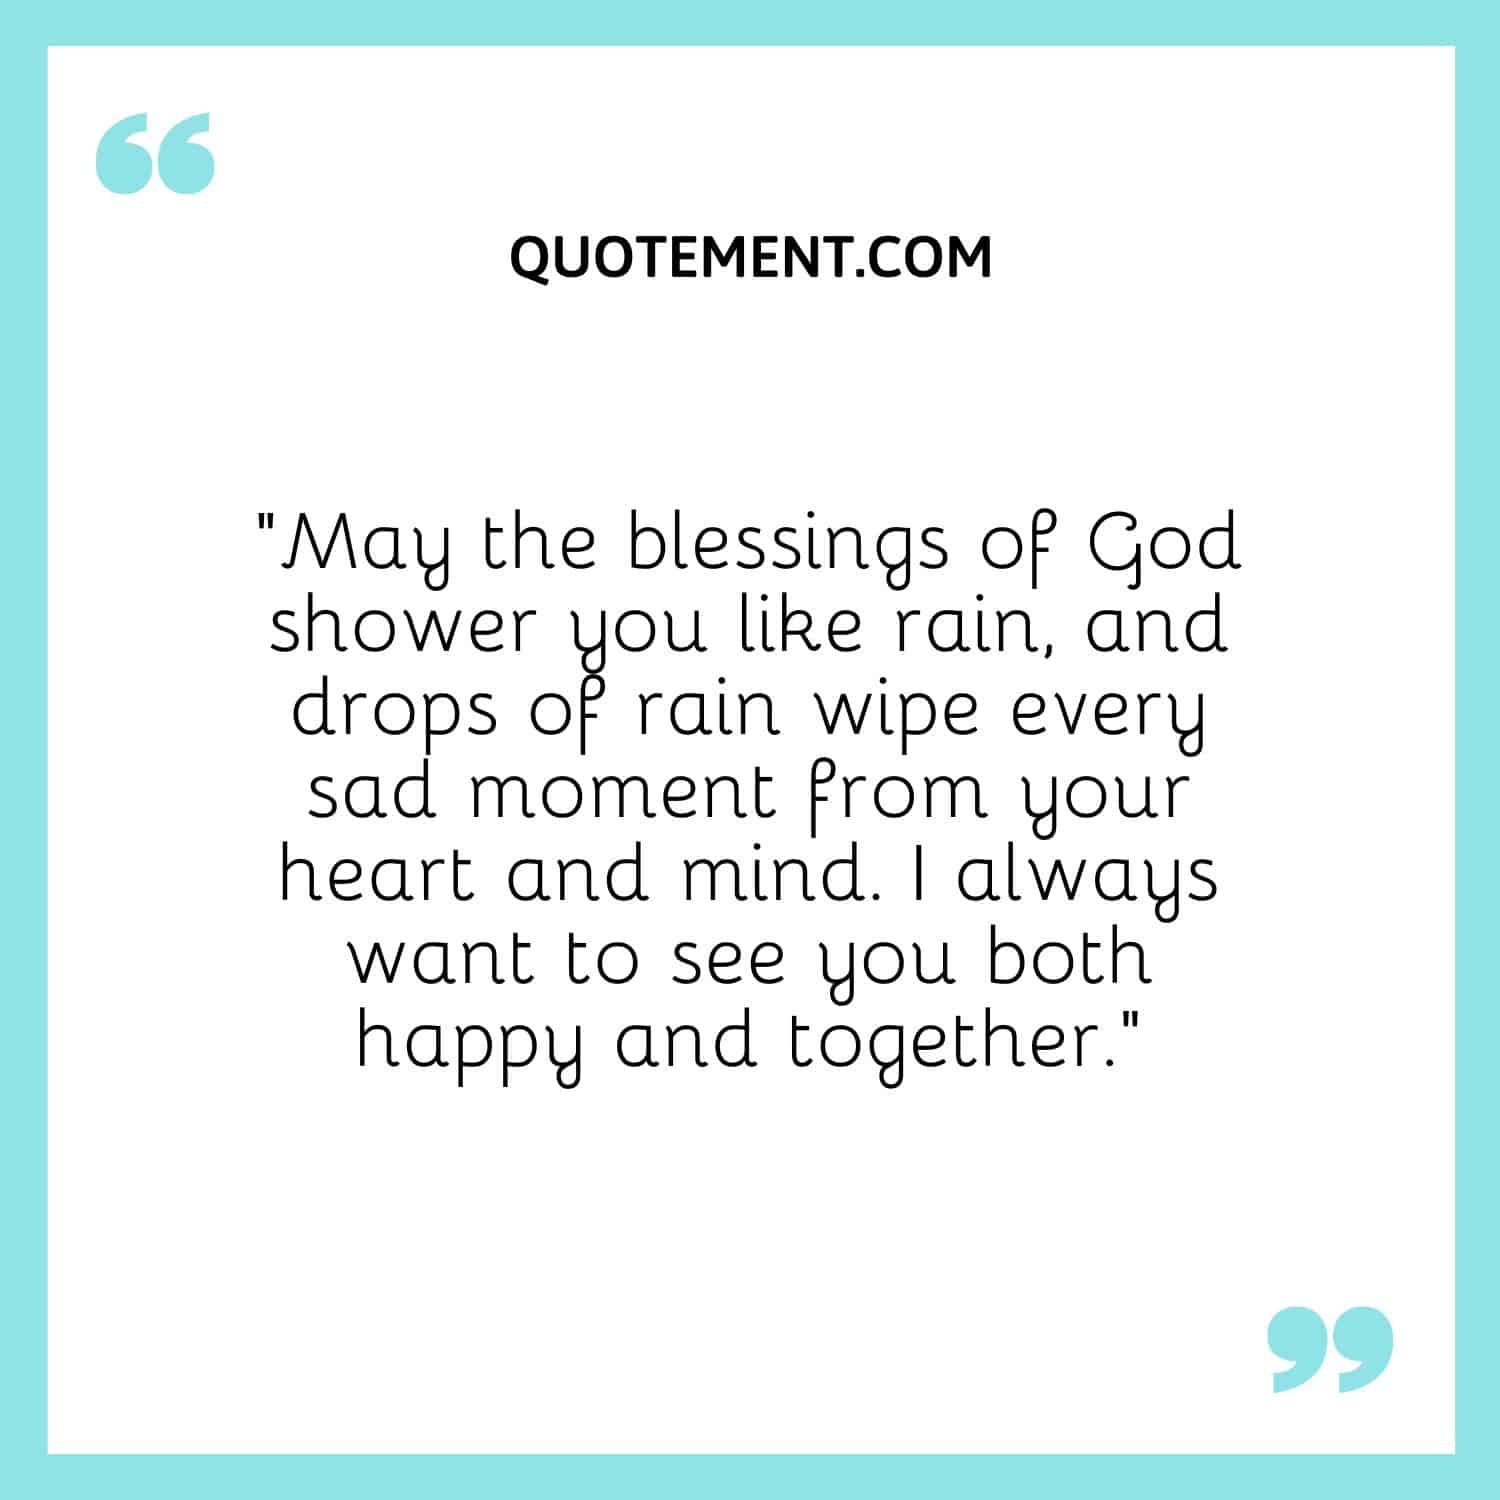 May the blessings of God shower you like rain